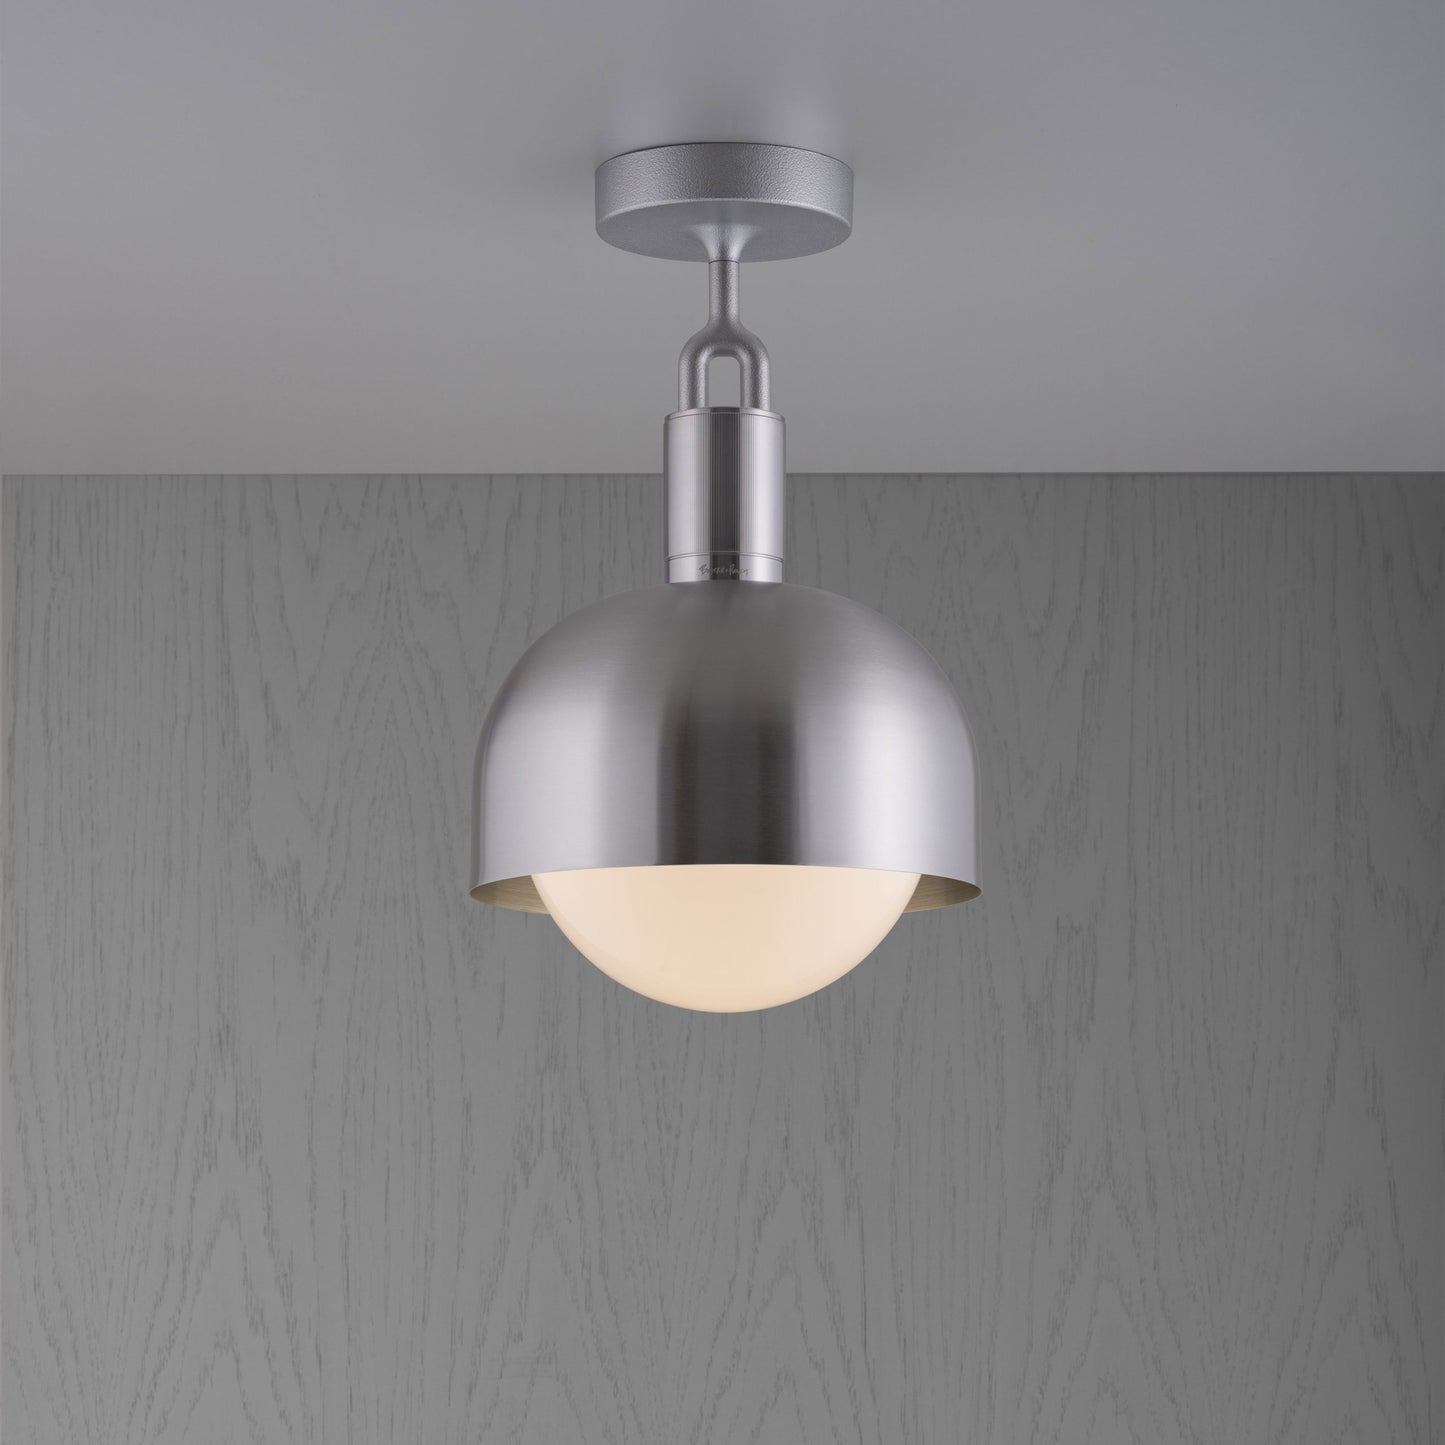 BUSTER AND PUNCH | MEDIUM FORKED CEILING GLOBE - $1,223